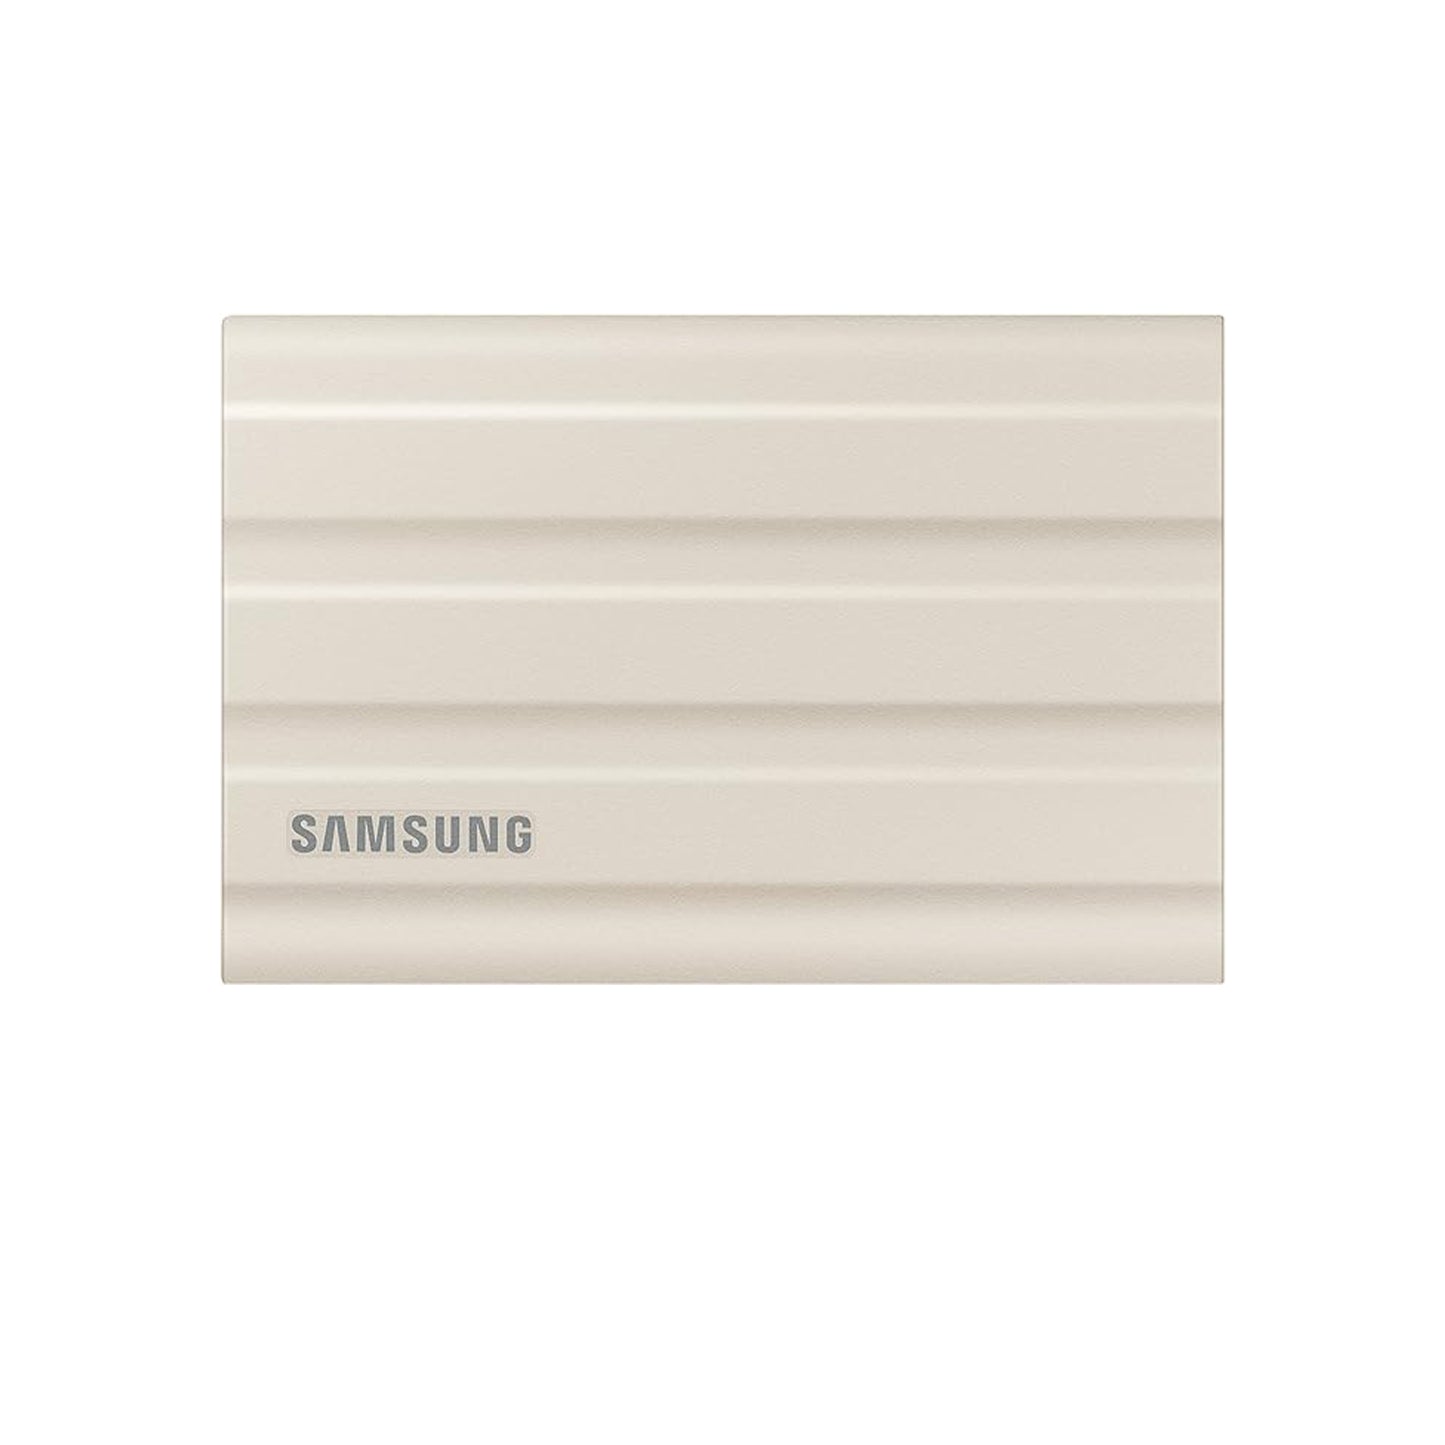 SAMSUNG T7 Shield Portable External Solid State Drive USB 3.2 1TB , IP65 Water Resistant, Compatible with PC / Mac / Android / Gaming Consoles (MUPE1T0K/AM), Beige